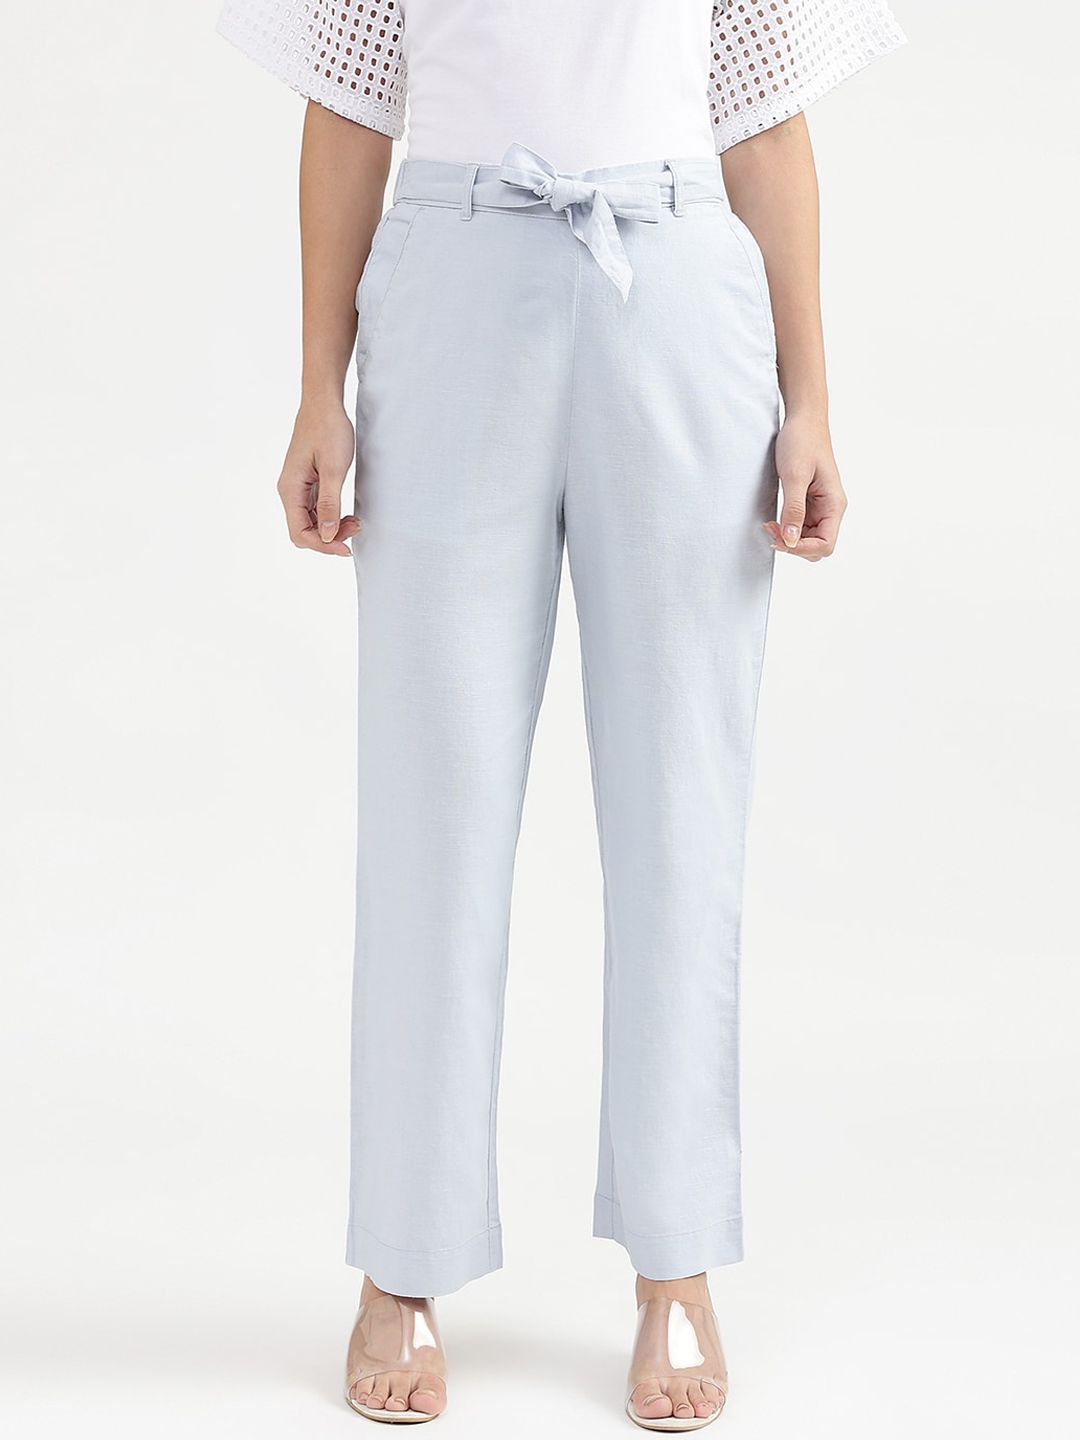 United Colors of Benetton Women Blue High-Rise Trousers Price in India